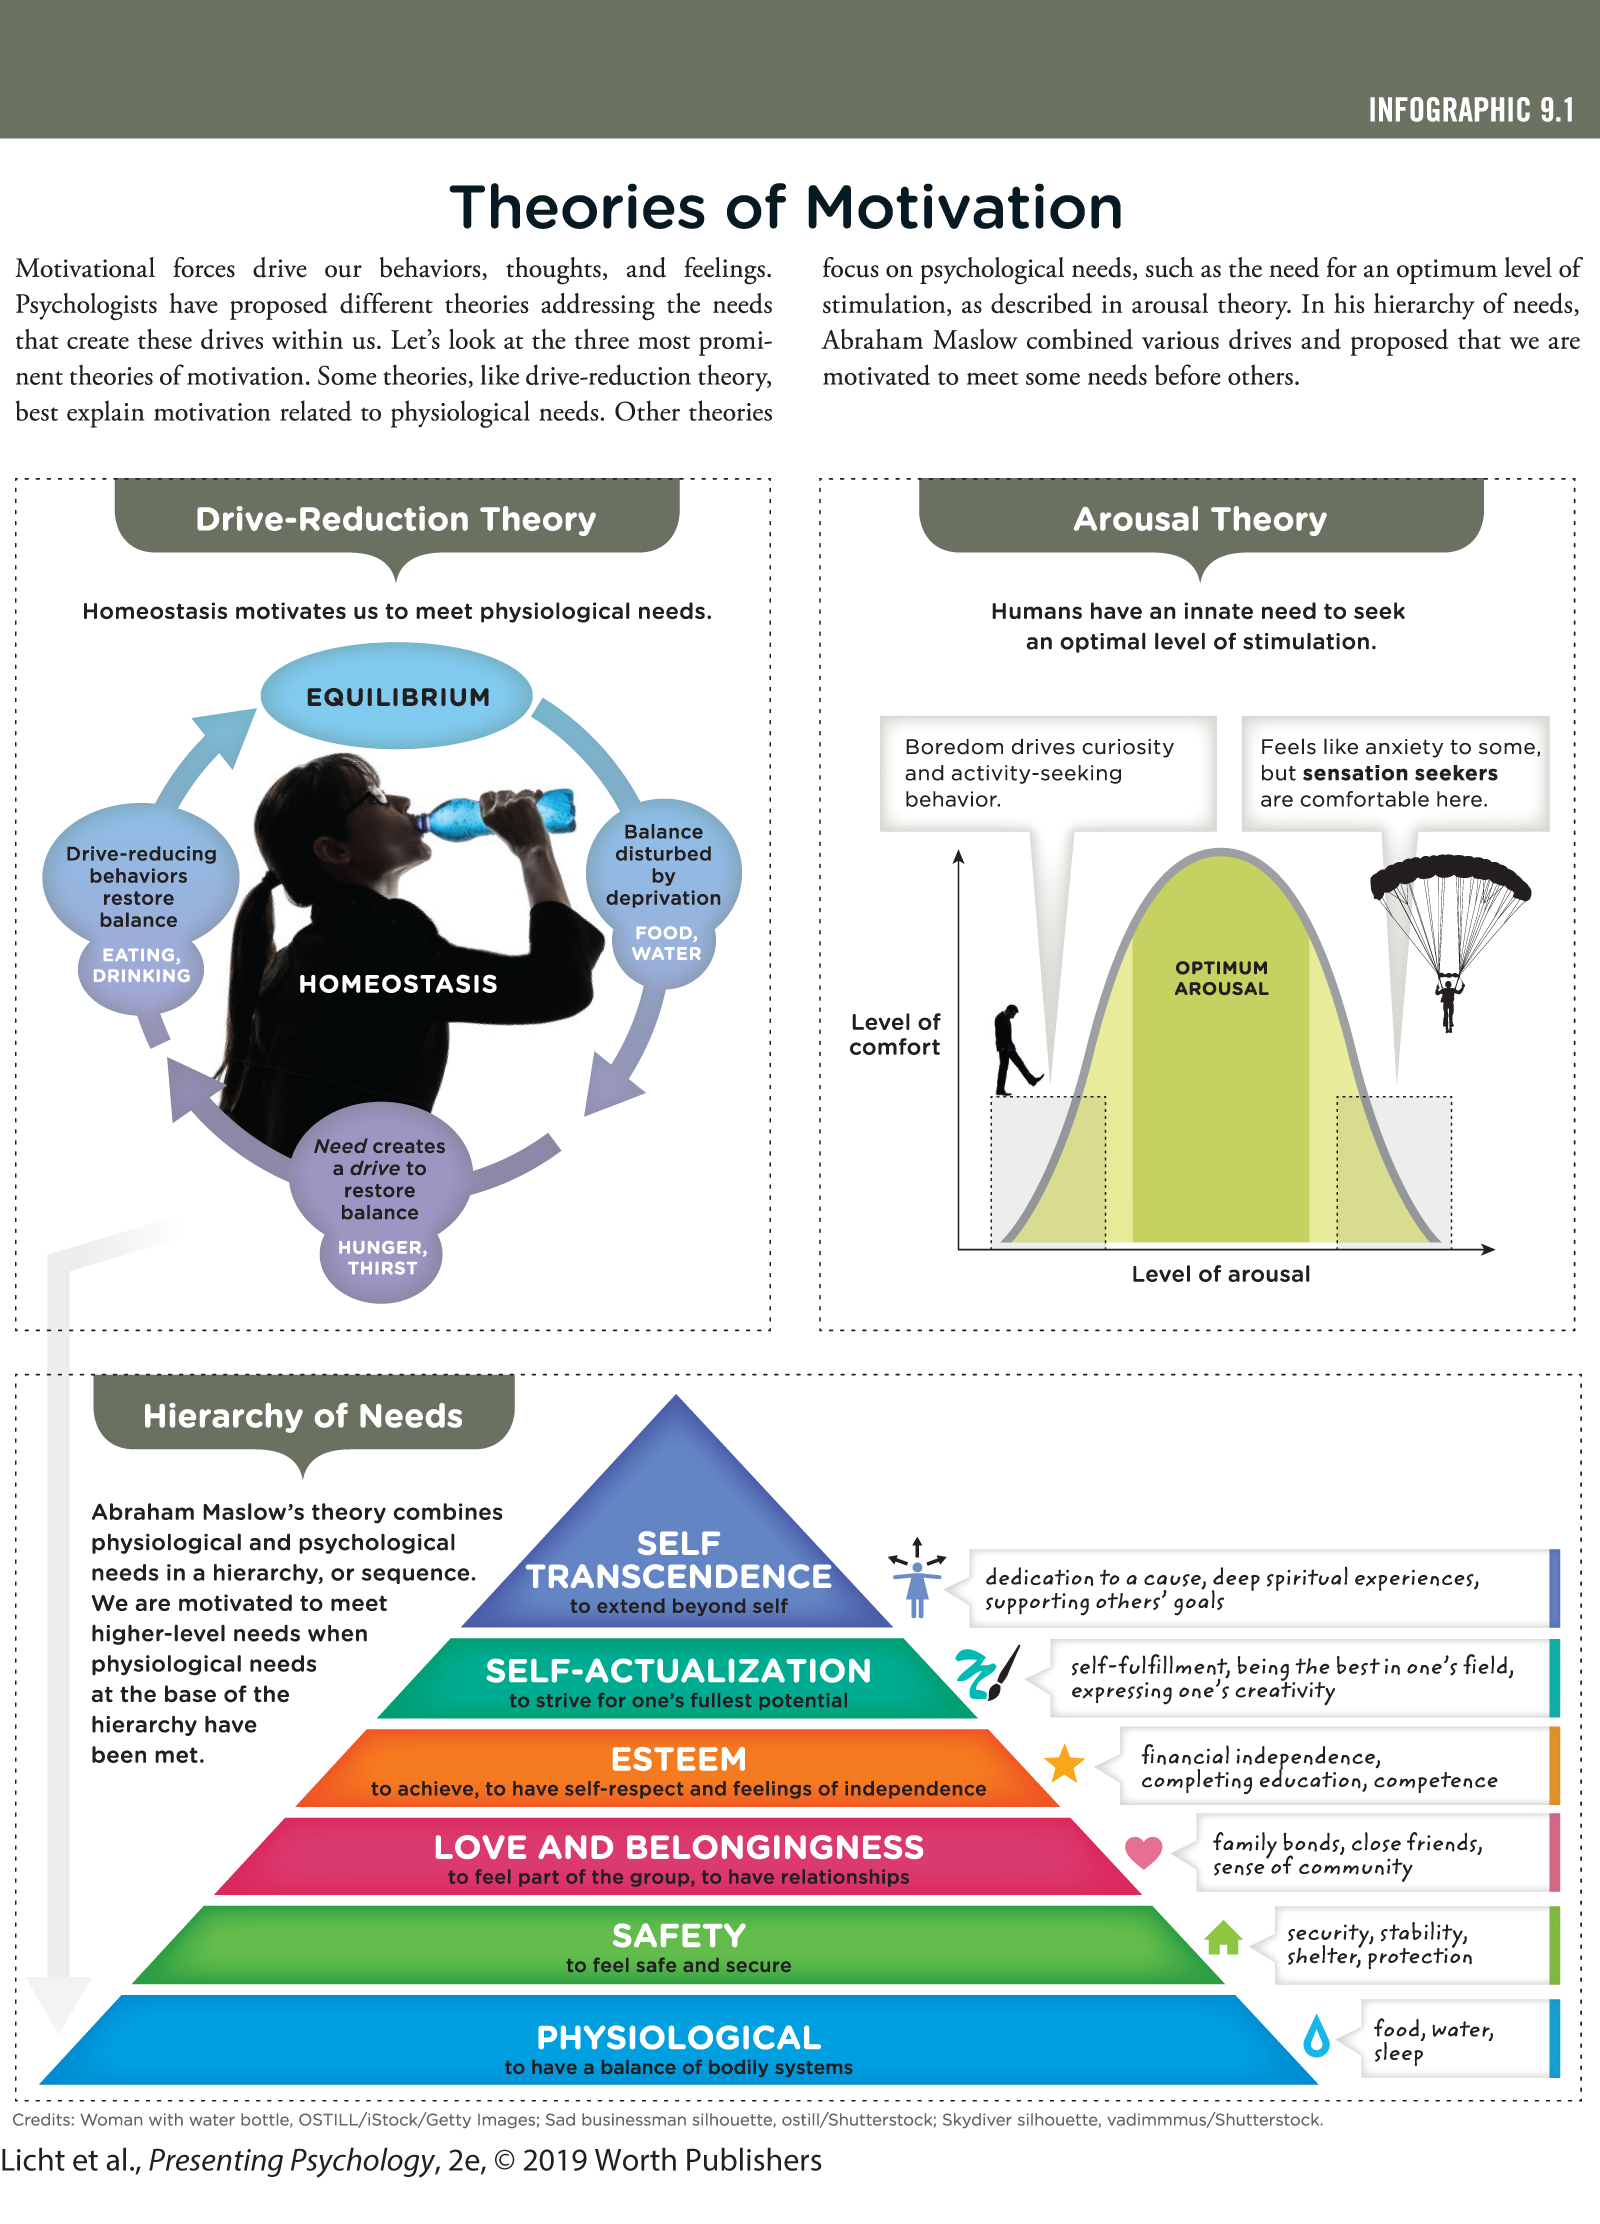 This image consists of three diagrams illustrating three theories of motivation; Drive-reduction Theory, Arousal theory, and Hierarchy of Needs. You can read full description from the link below